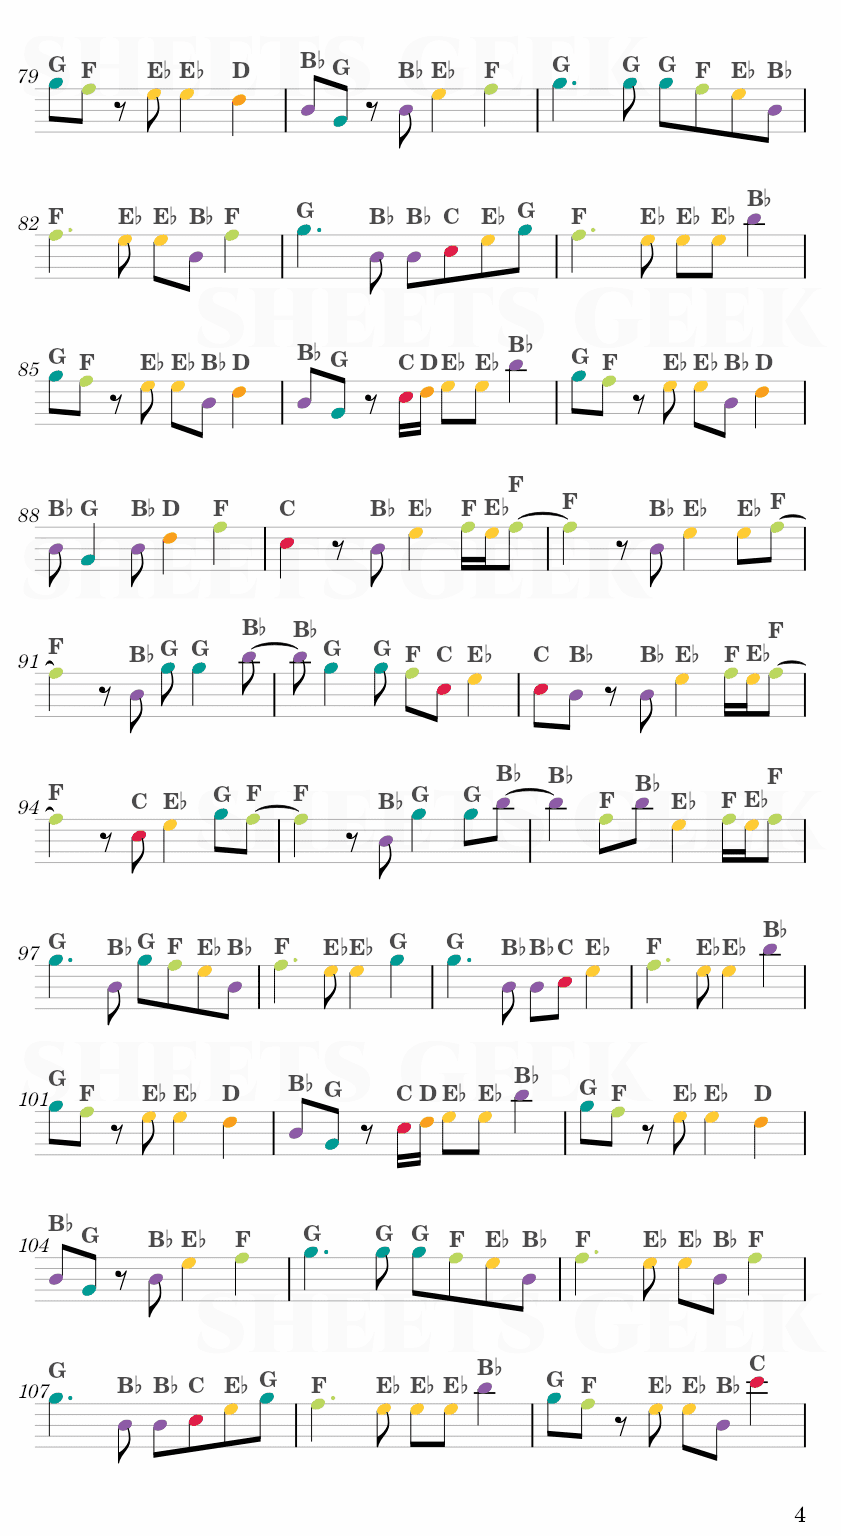 Spring Day - BTS Easy Sheets Music Free for piano, keyboard, flute, violin, sax, celllo 4